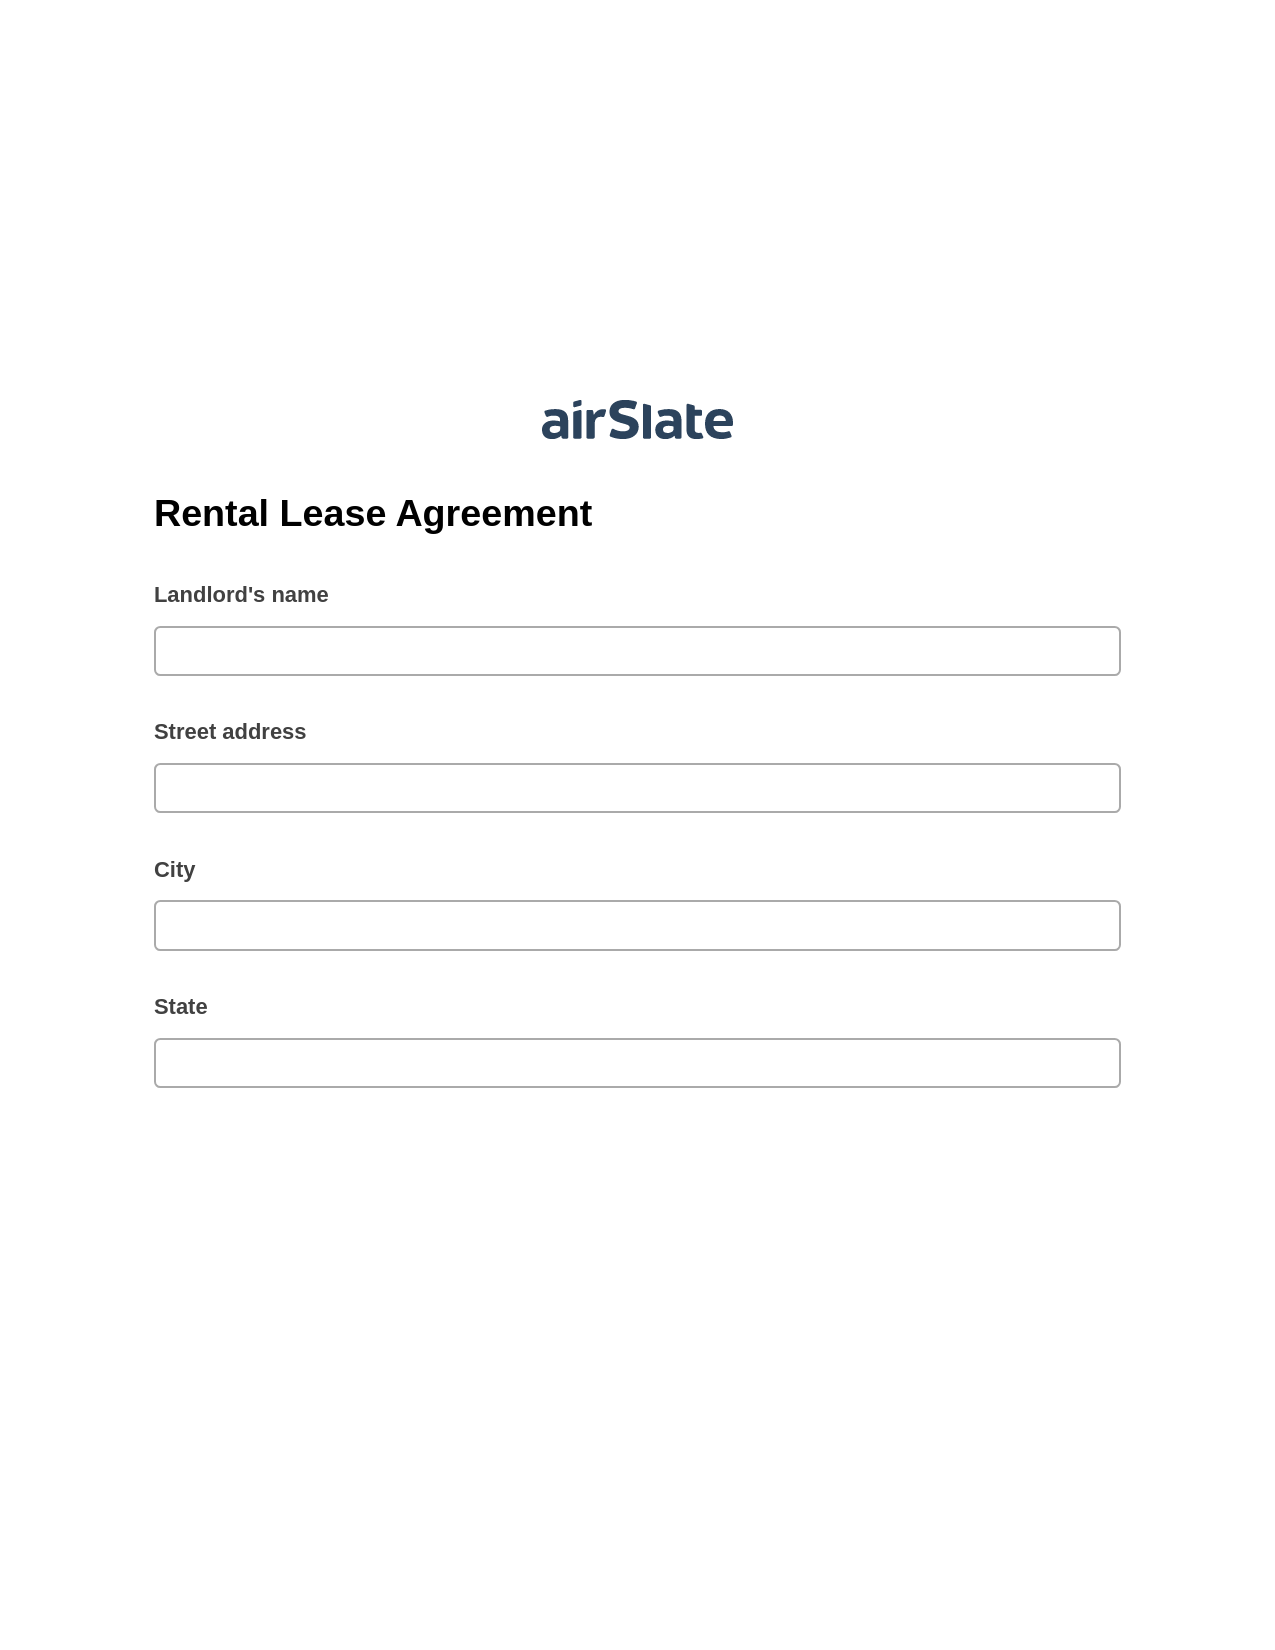 Multirole Rental Lease Agreement Pre-fill Dropdown from Airtable, Invoke Salesforce Process Bot, Export to Formstack Documents Bot